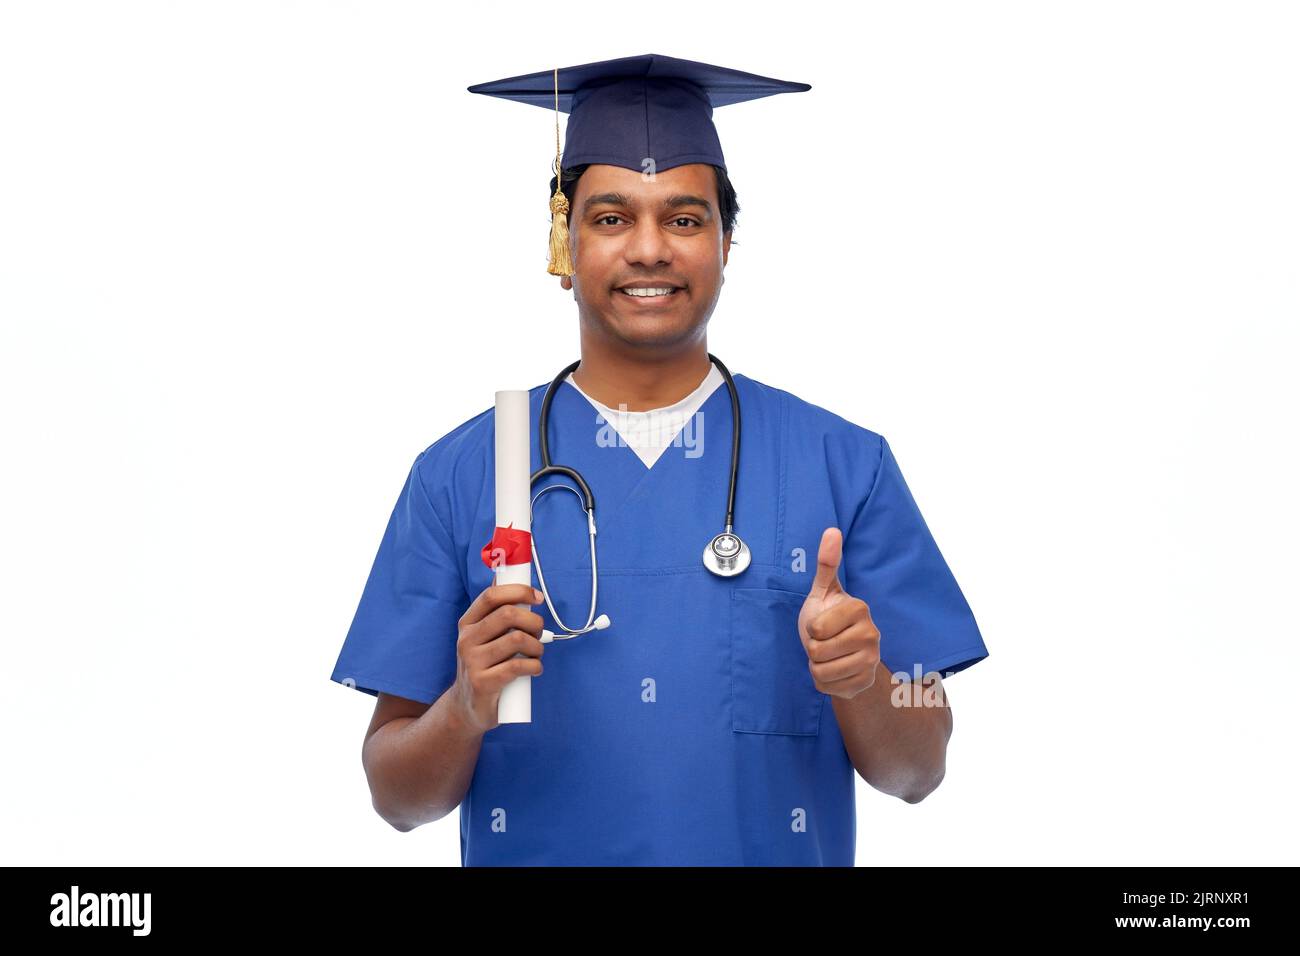 indian doctor or medical student with diploma Stock Photo